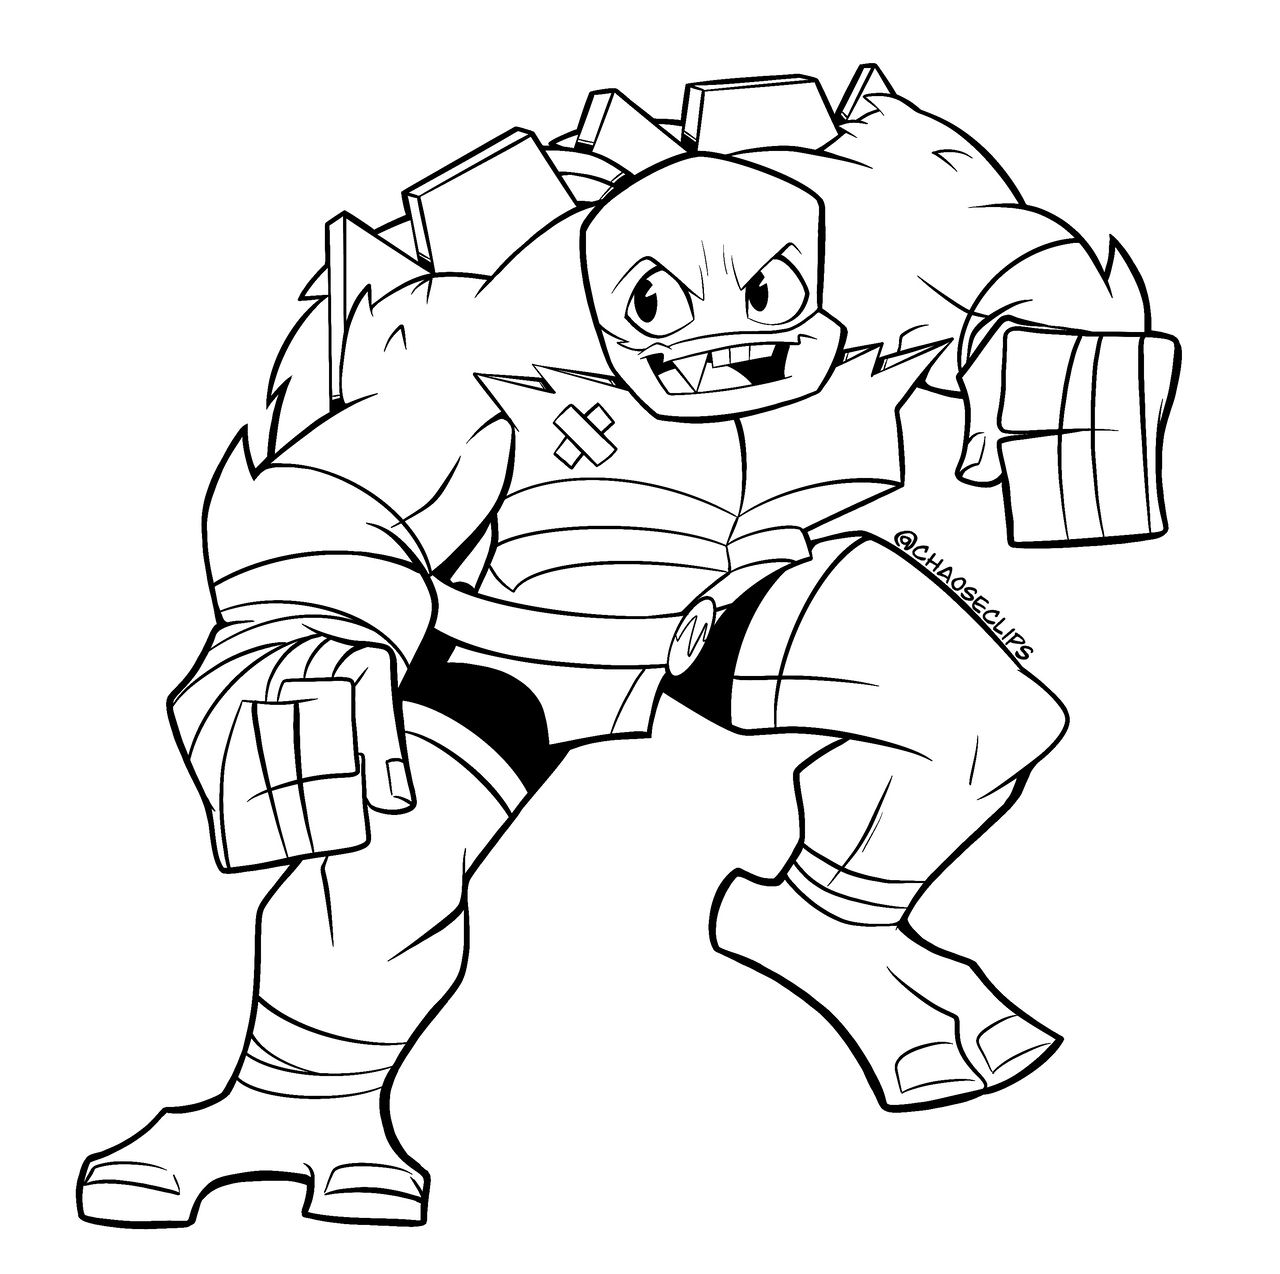 Raph Coloring Page! by ChaosEclips on DeviantArt